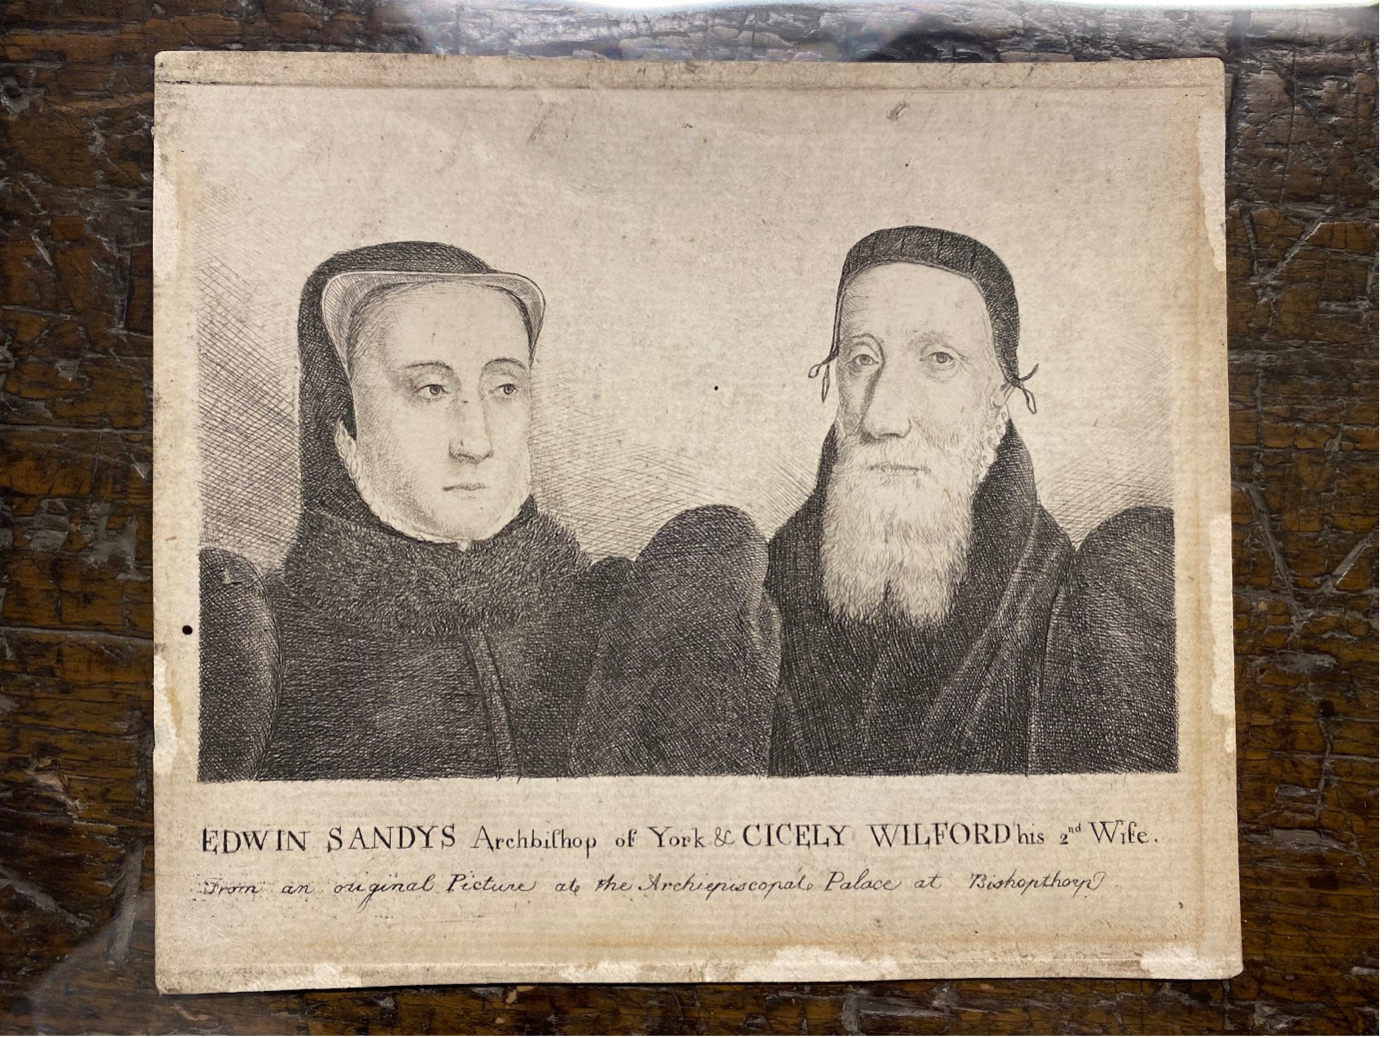 Engraving of Cicely Wilford and her husband Edwyn Sandys. Black and white portraits. The person on the left is wearing a hood and the person on the right has a white beard and is wearing a bonnet.